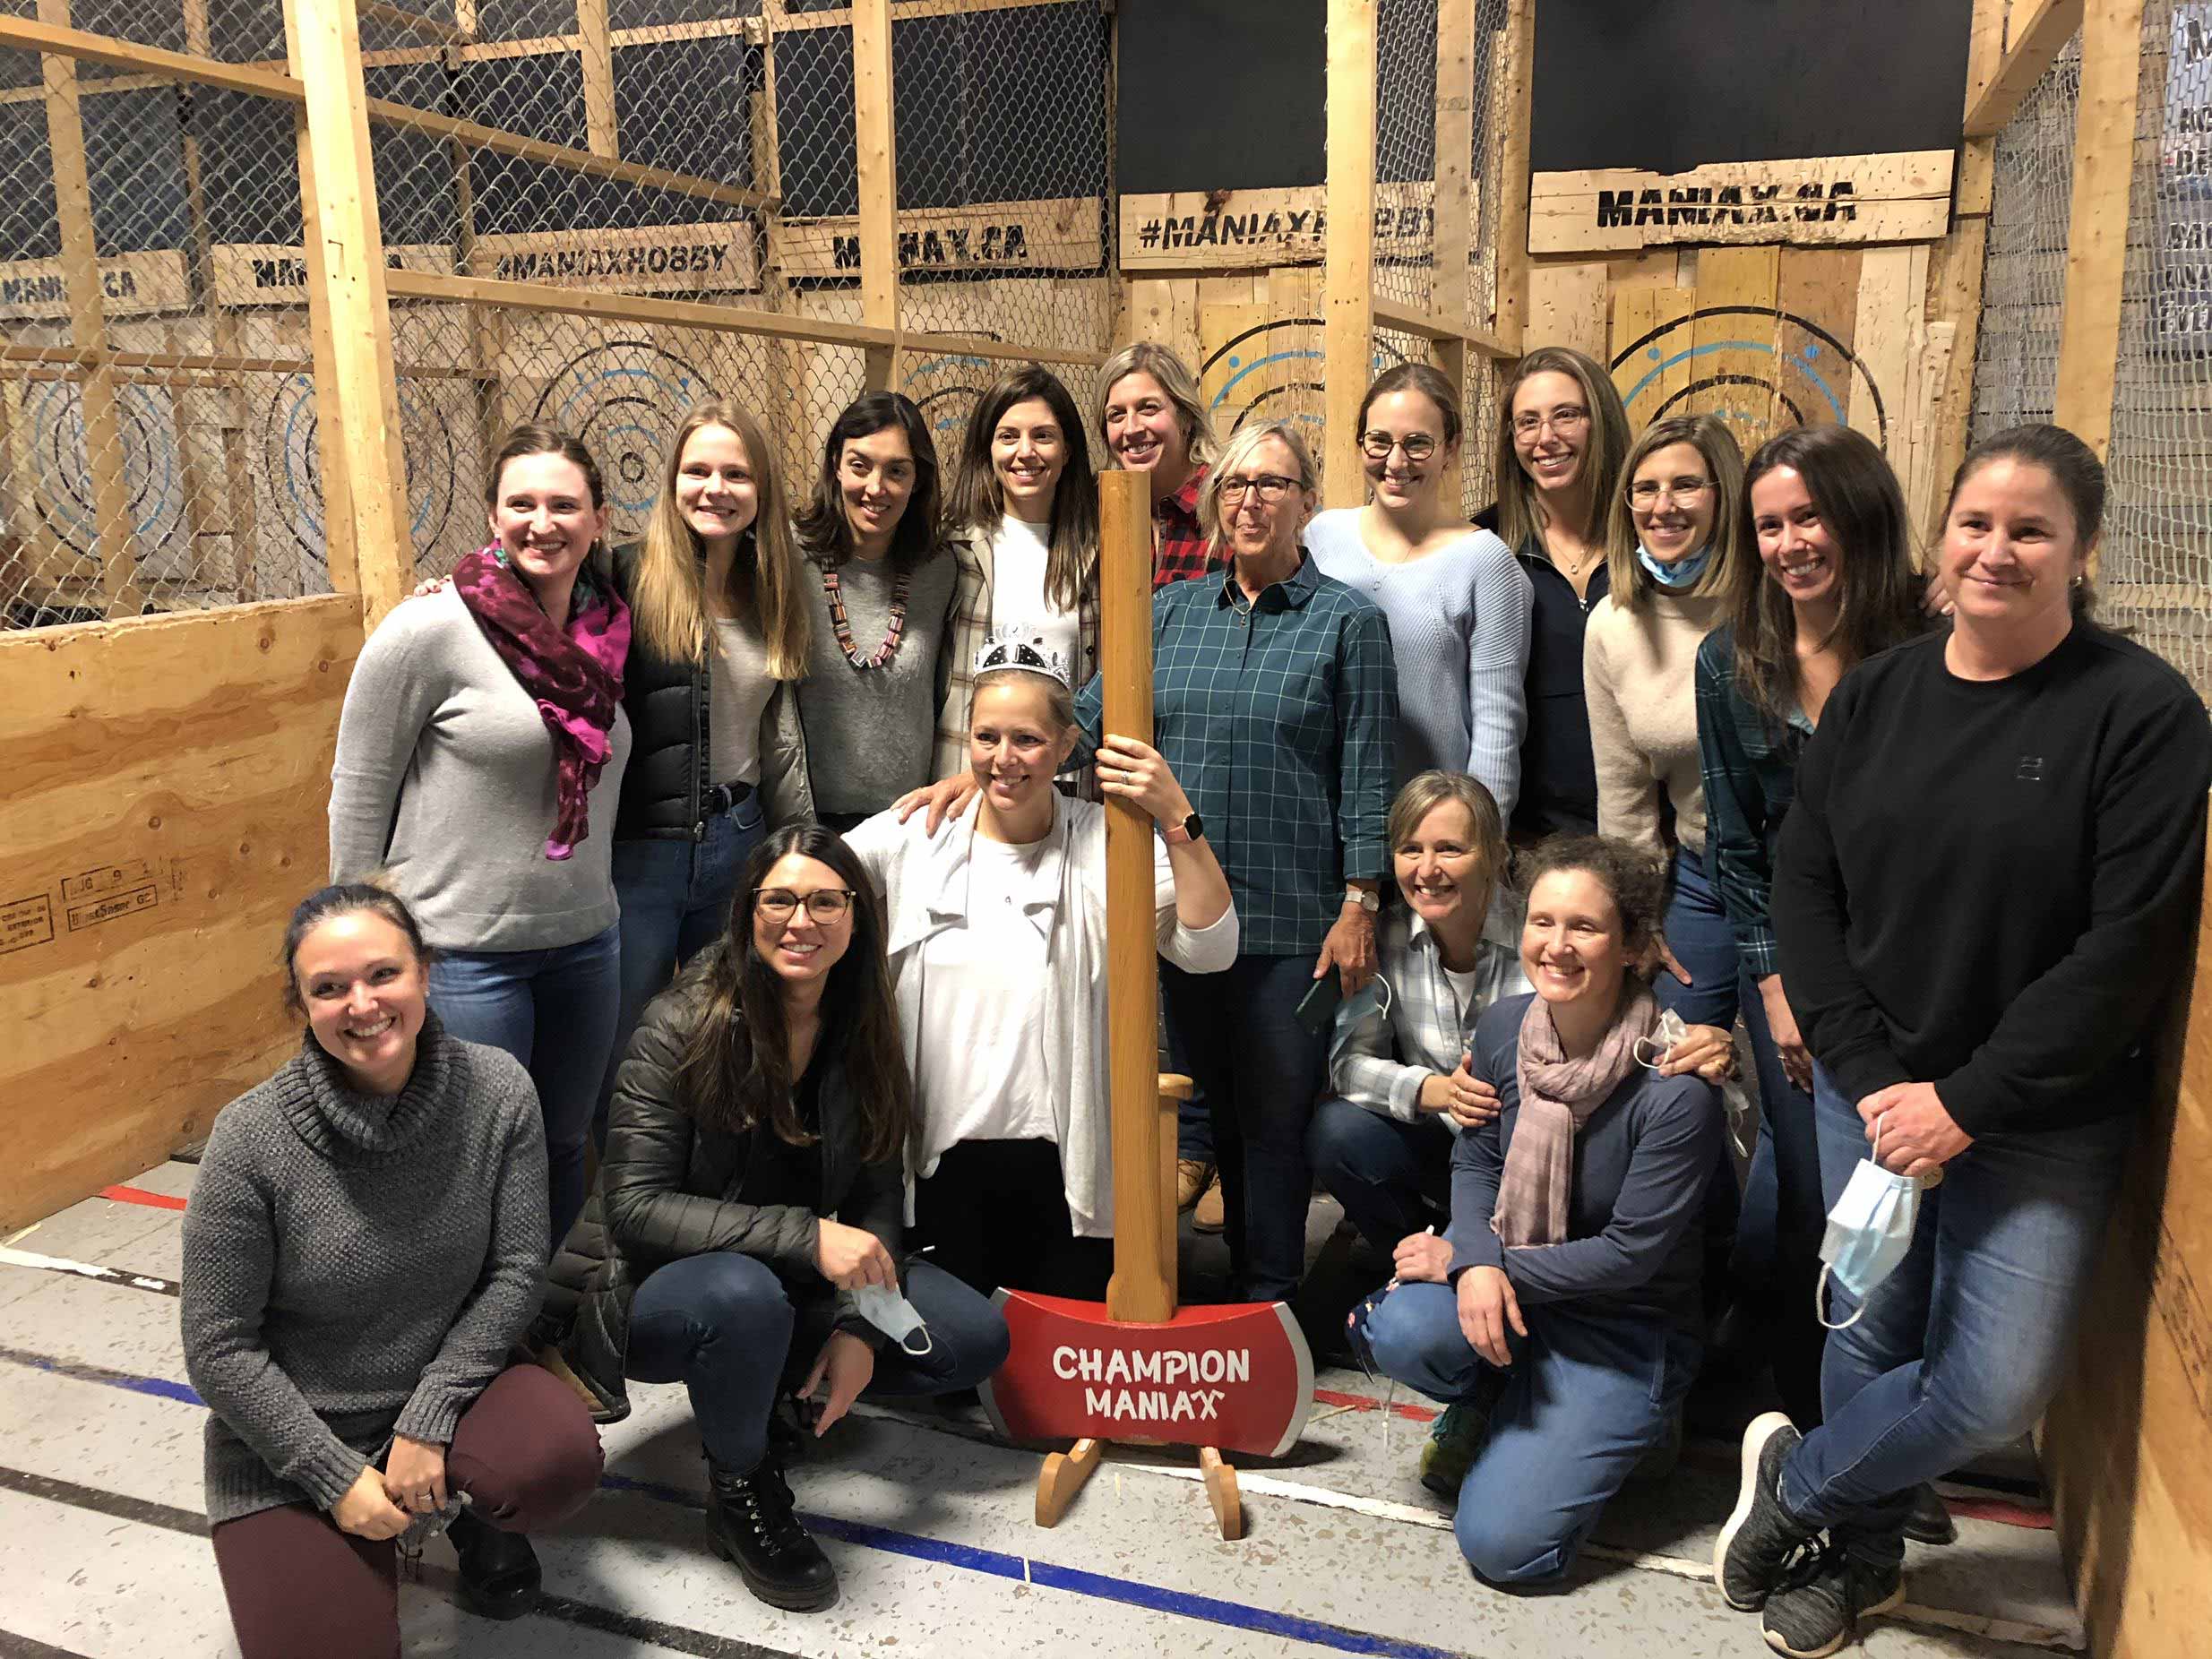 Maniax Laval / Axe Throwing / Bachelorette Party